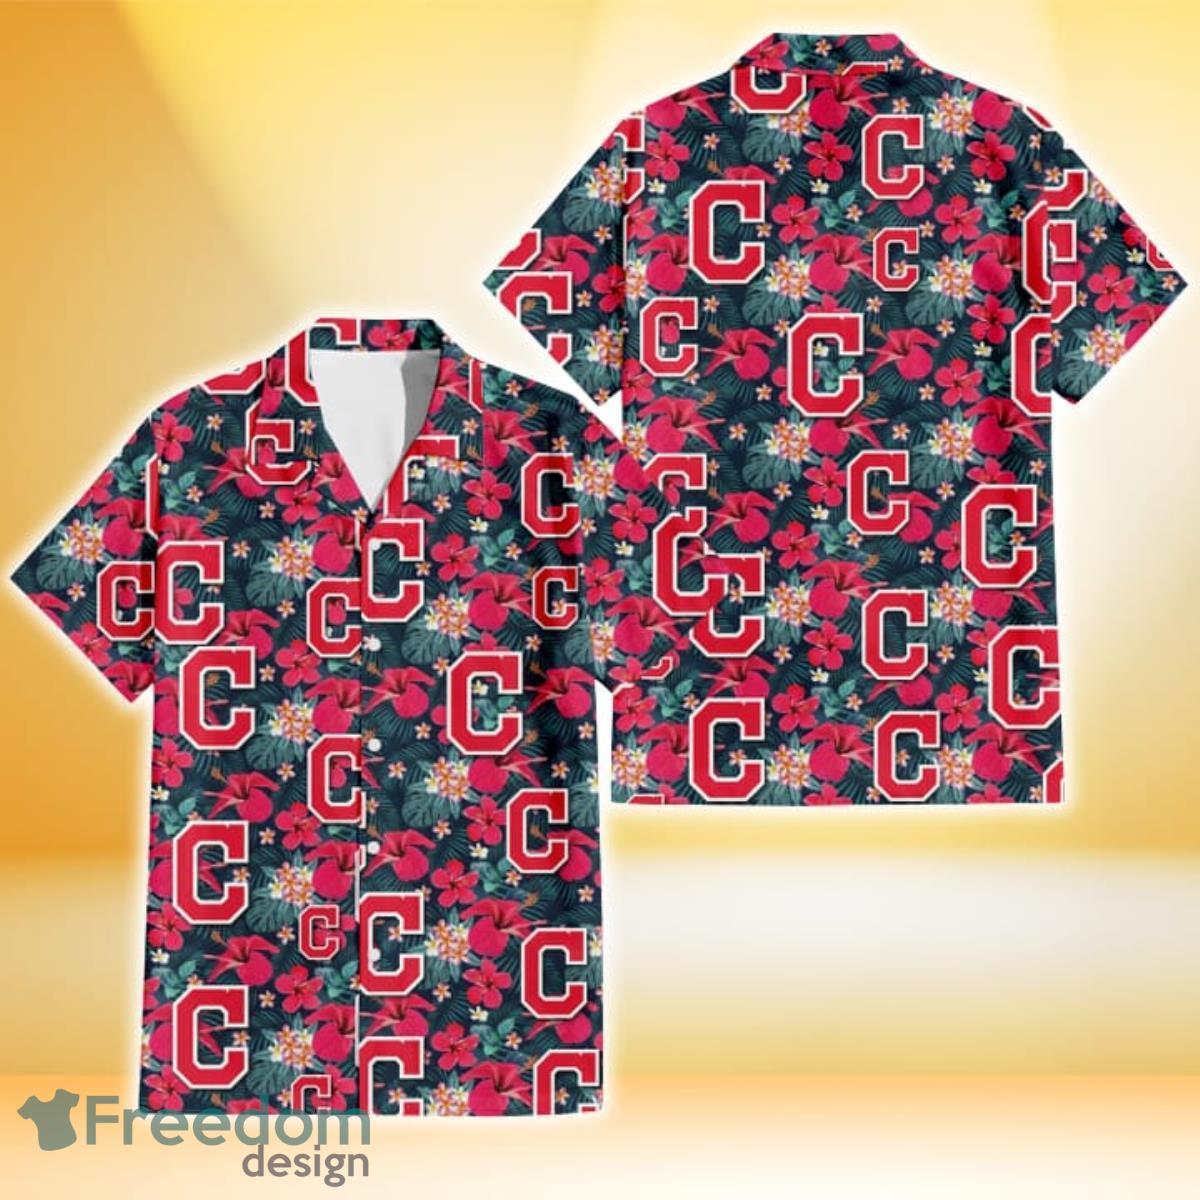 Cleveland Indians White Hibiscus Porcelain Flower Palm Leaf Black 3D  Hawaiian Shirt Gift For Fans - Freedomdesign